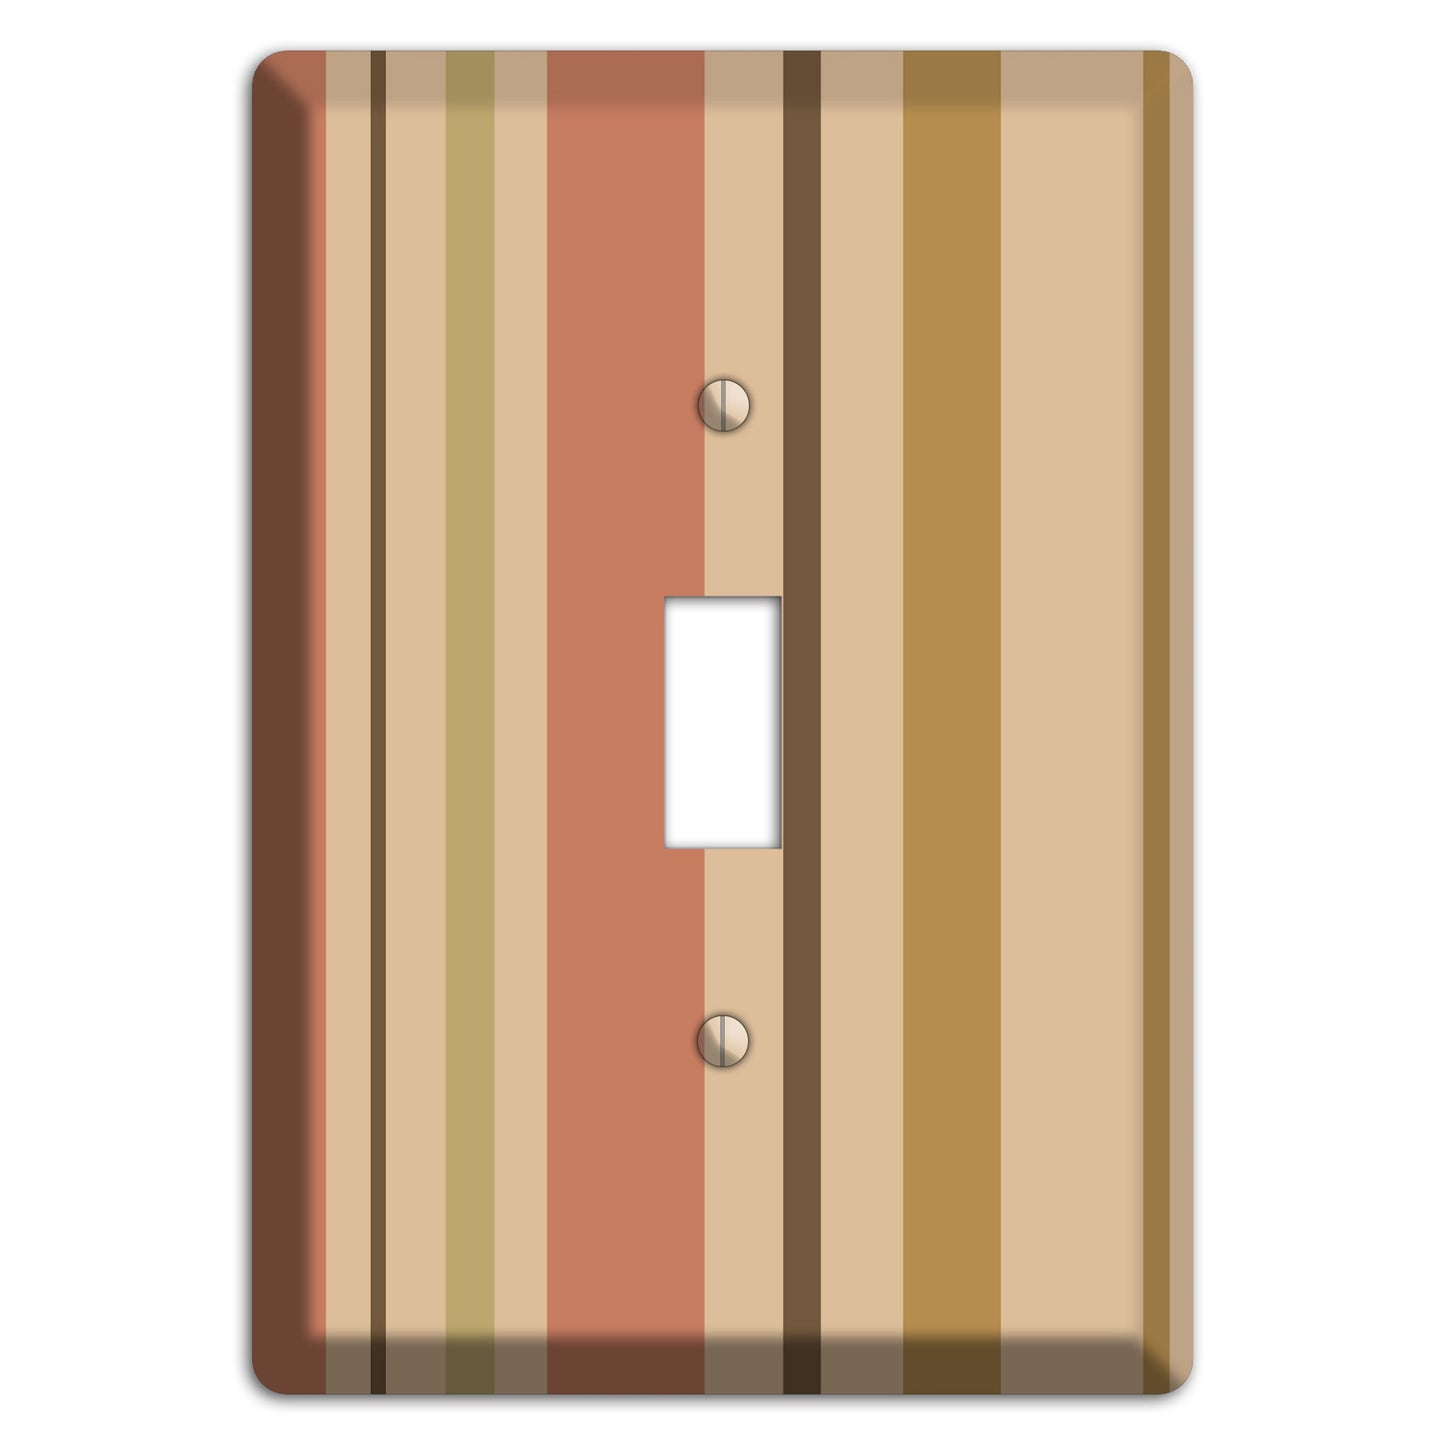 Multi Dusty Pink Vertical Stripes Cover Plates